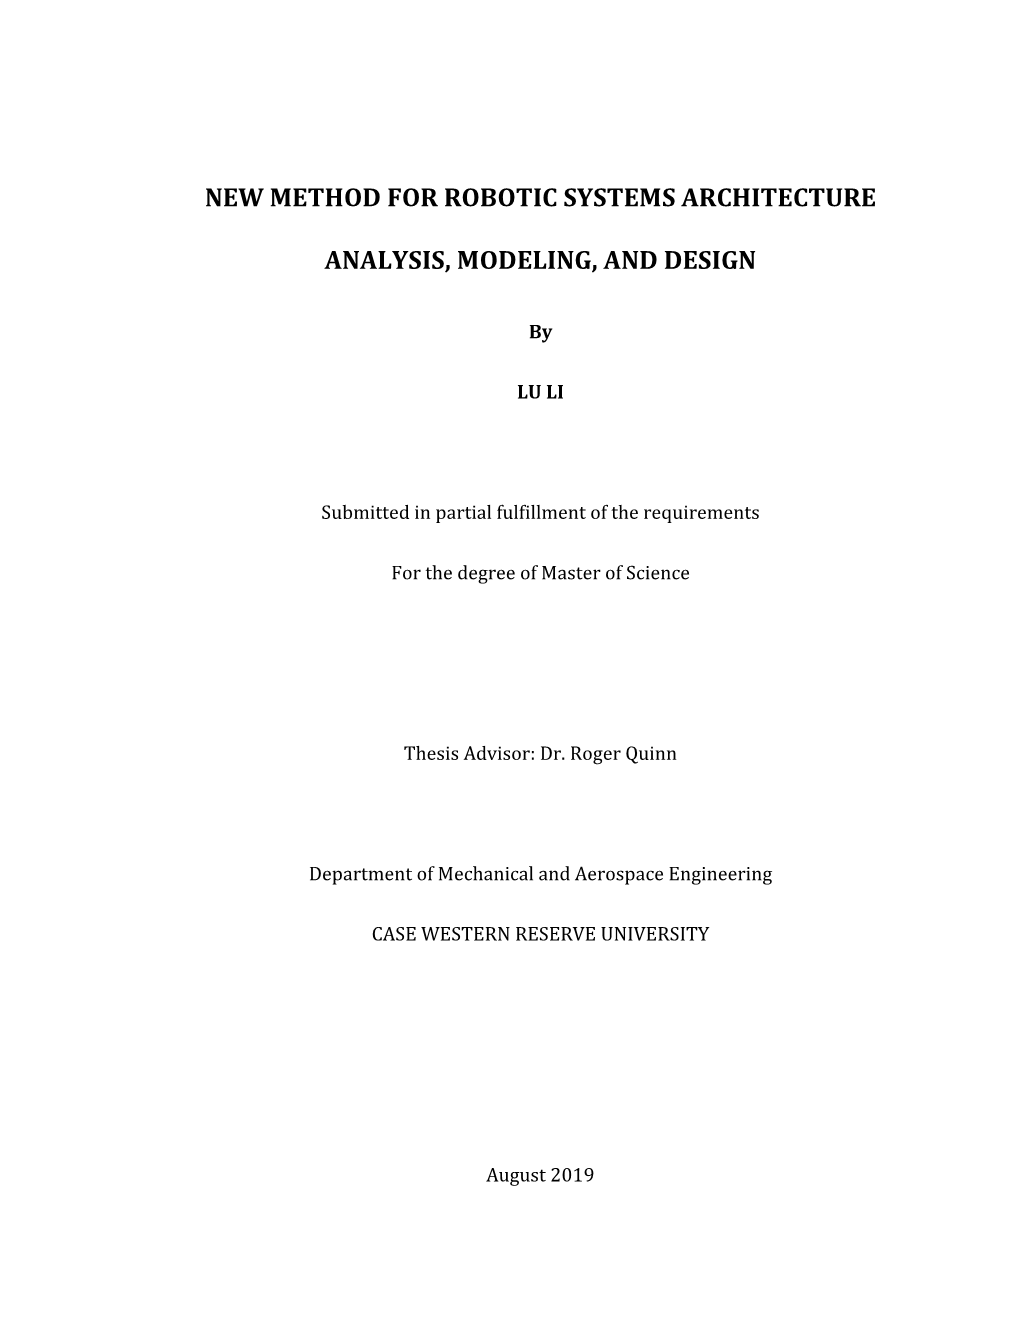 New Method for Robotic Systems Architecture